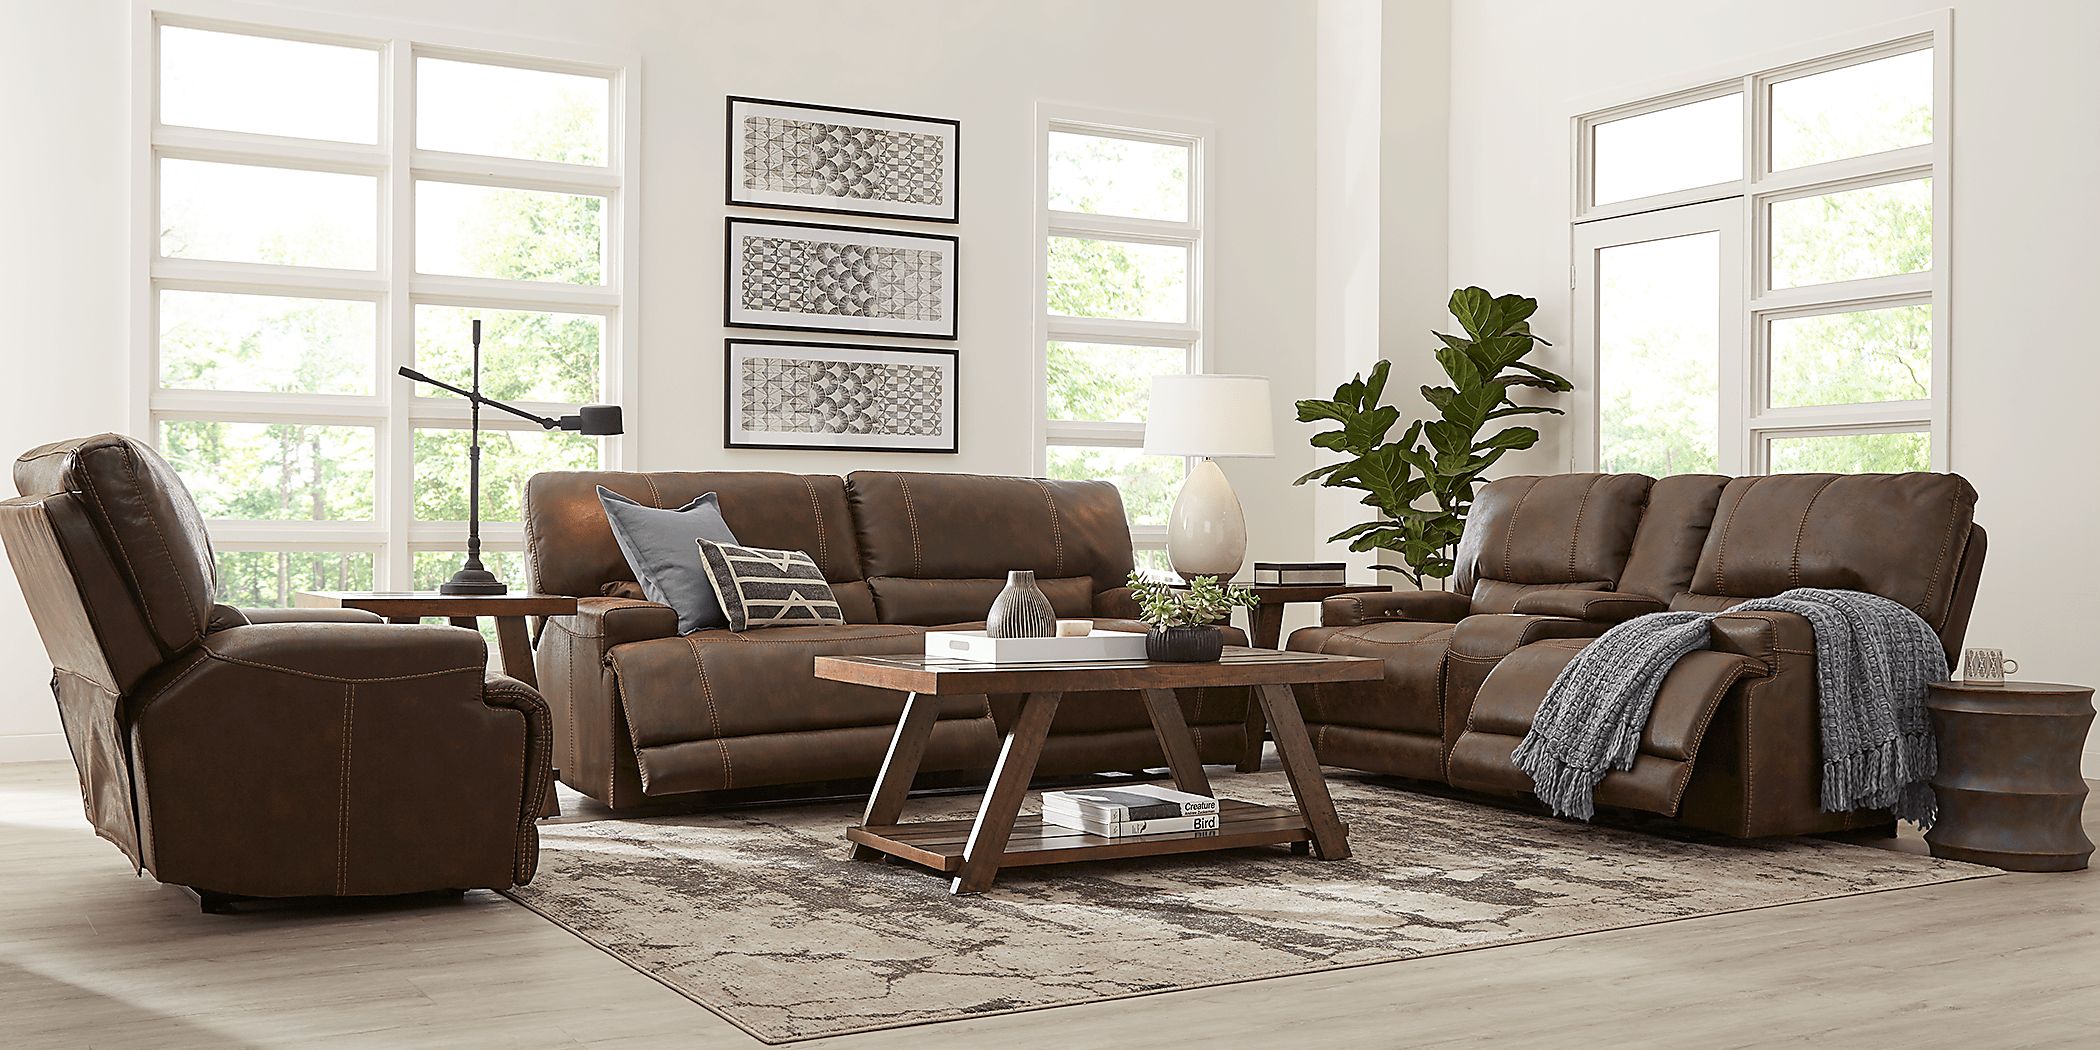 Warrendale Chocolate 5 Pc Power Reclining Living Room - Rooms To Go